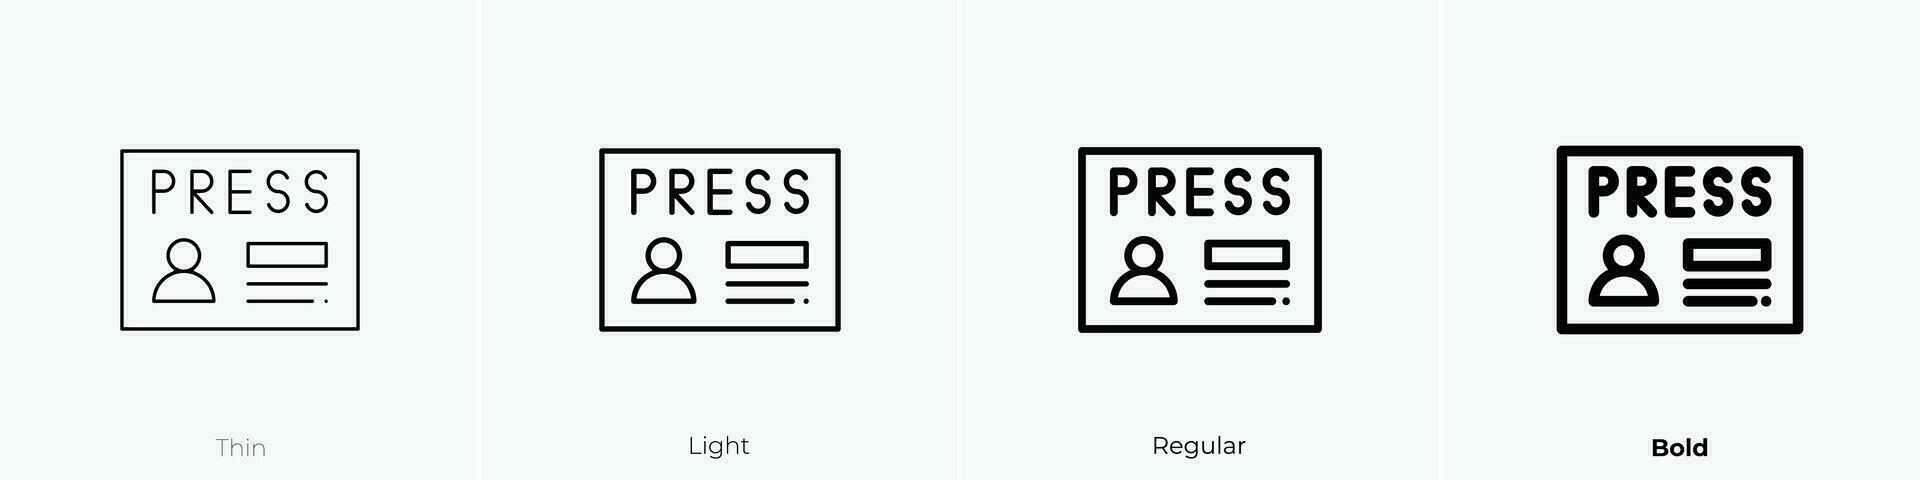 pass icon. Thin, Light, Regular And Bold style design isolated on white background vector